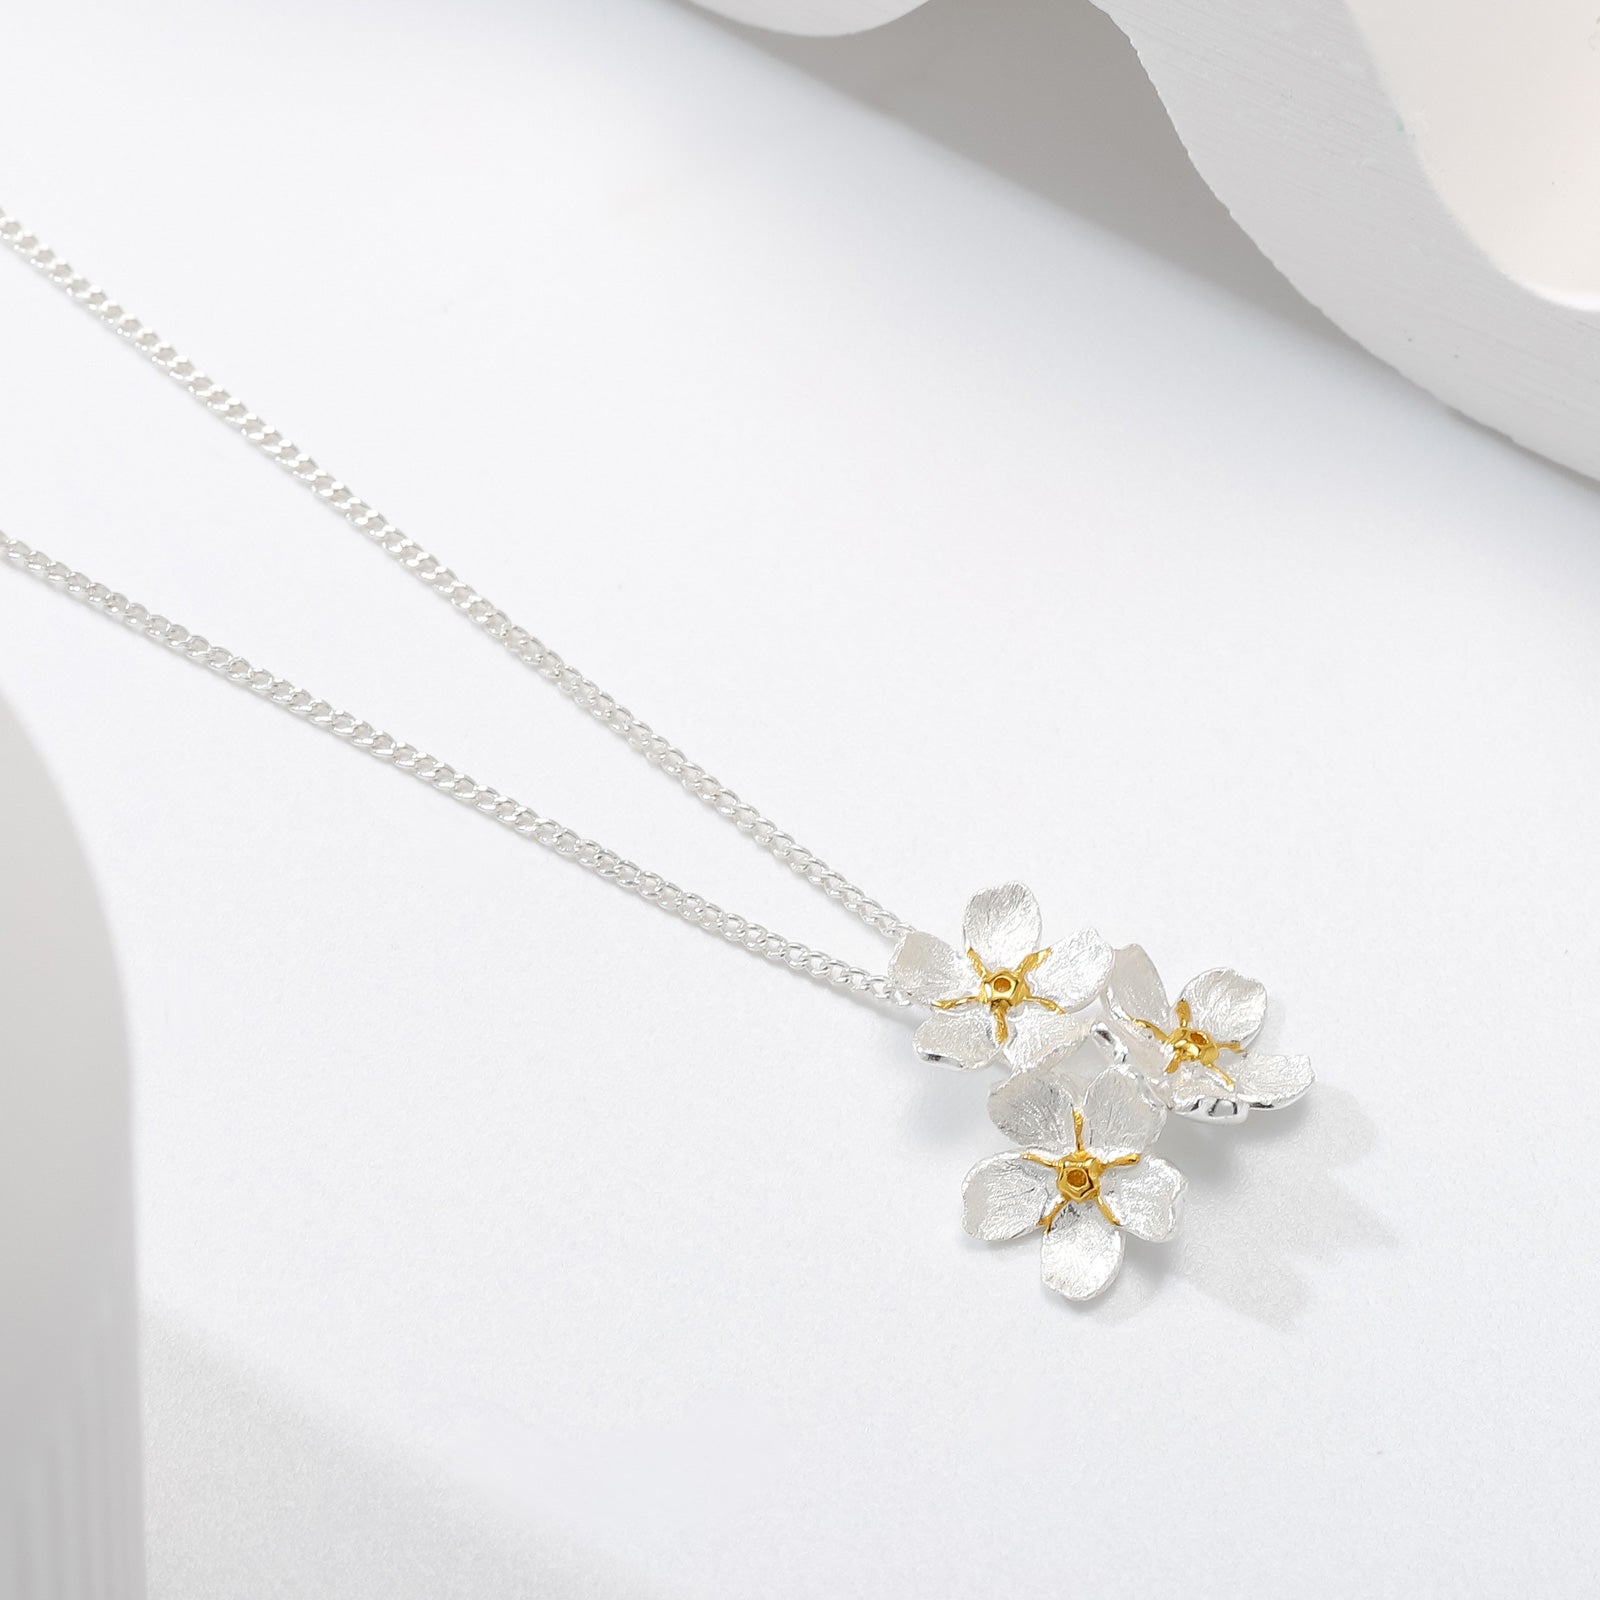 Forget-Me-Not Flowers Necklace